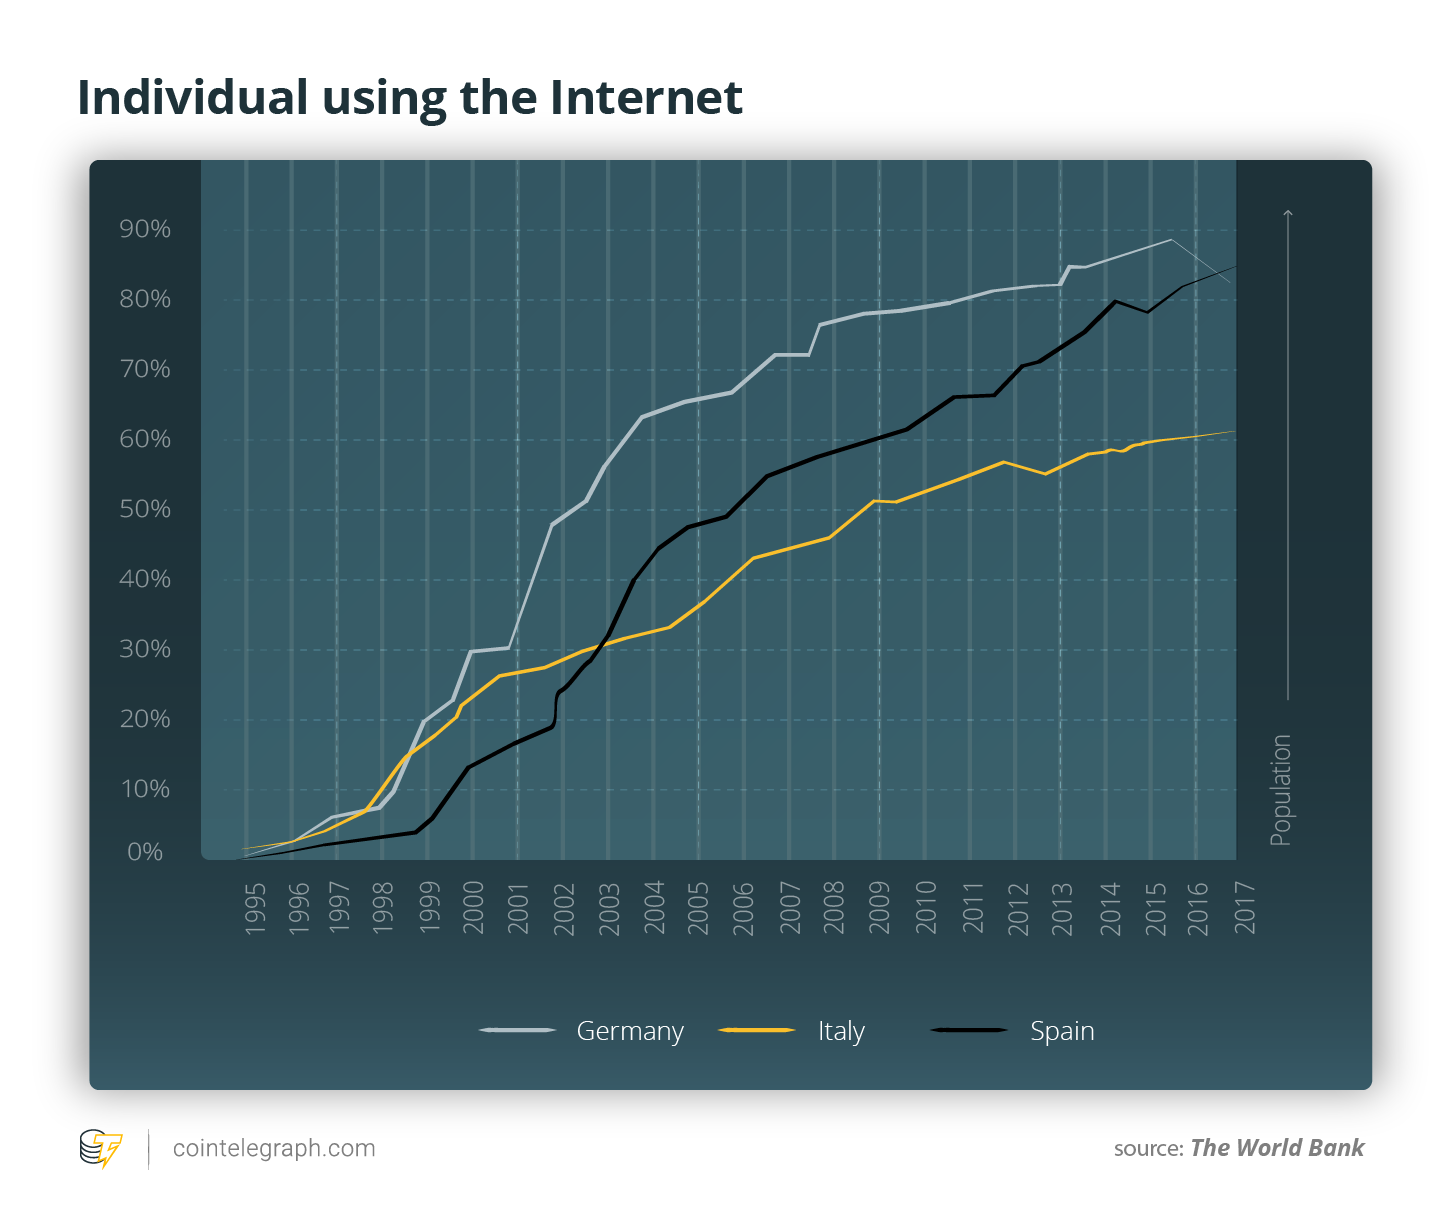 Individual using the Internet (% population)